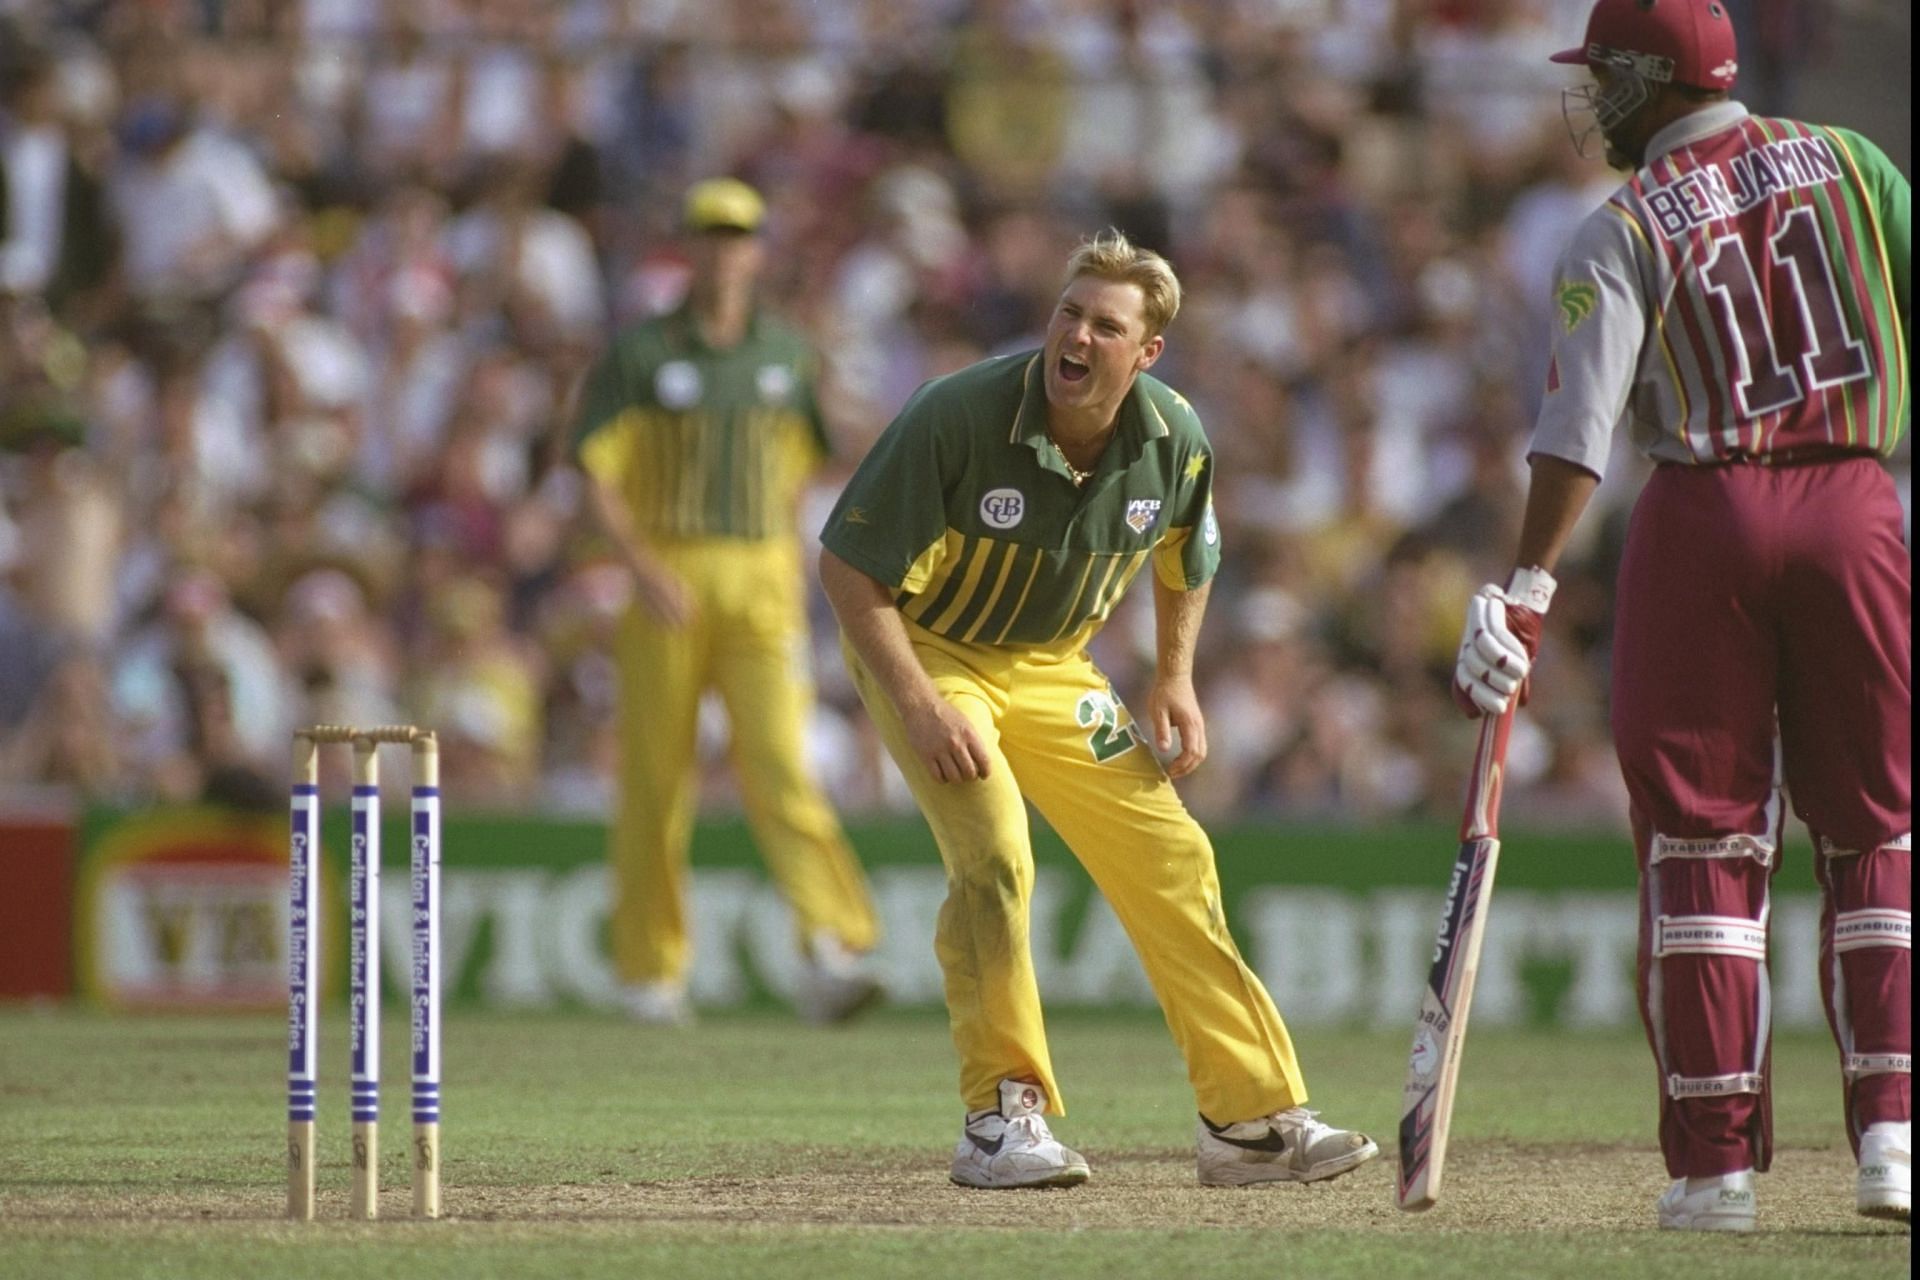 Shane Warne&rsquo;s appeals were as convincing as his deliveries. Here he pleads for a wicket during an ODI against West Indies at Sydney in 1996. Pic: Getty Images